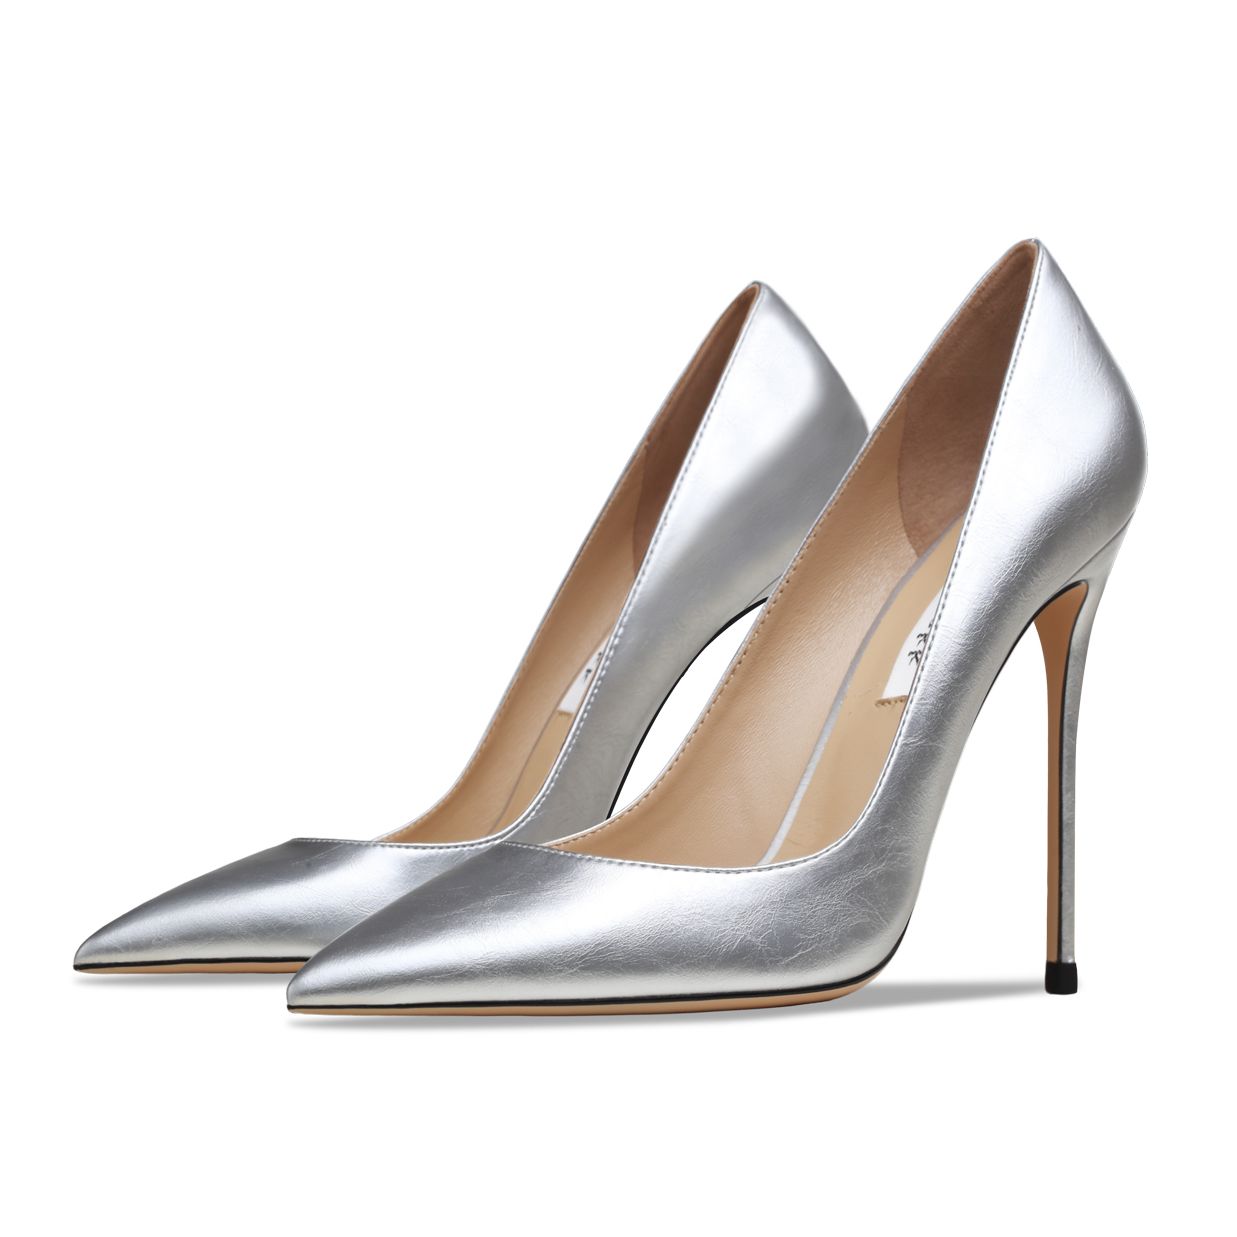 Real Leather Pointed Toe High Heels Silver Sexy Pumps Shoes For Women 2022 New Stilettos Fashion Luxury Wedding Party Shoes 8cm